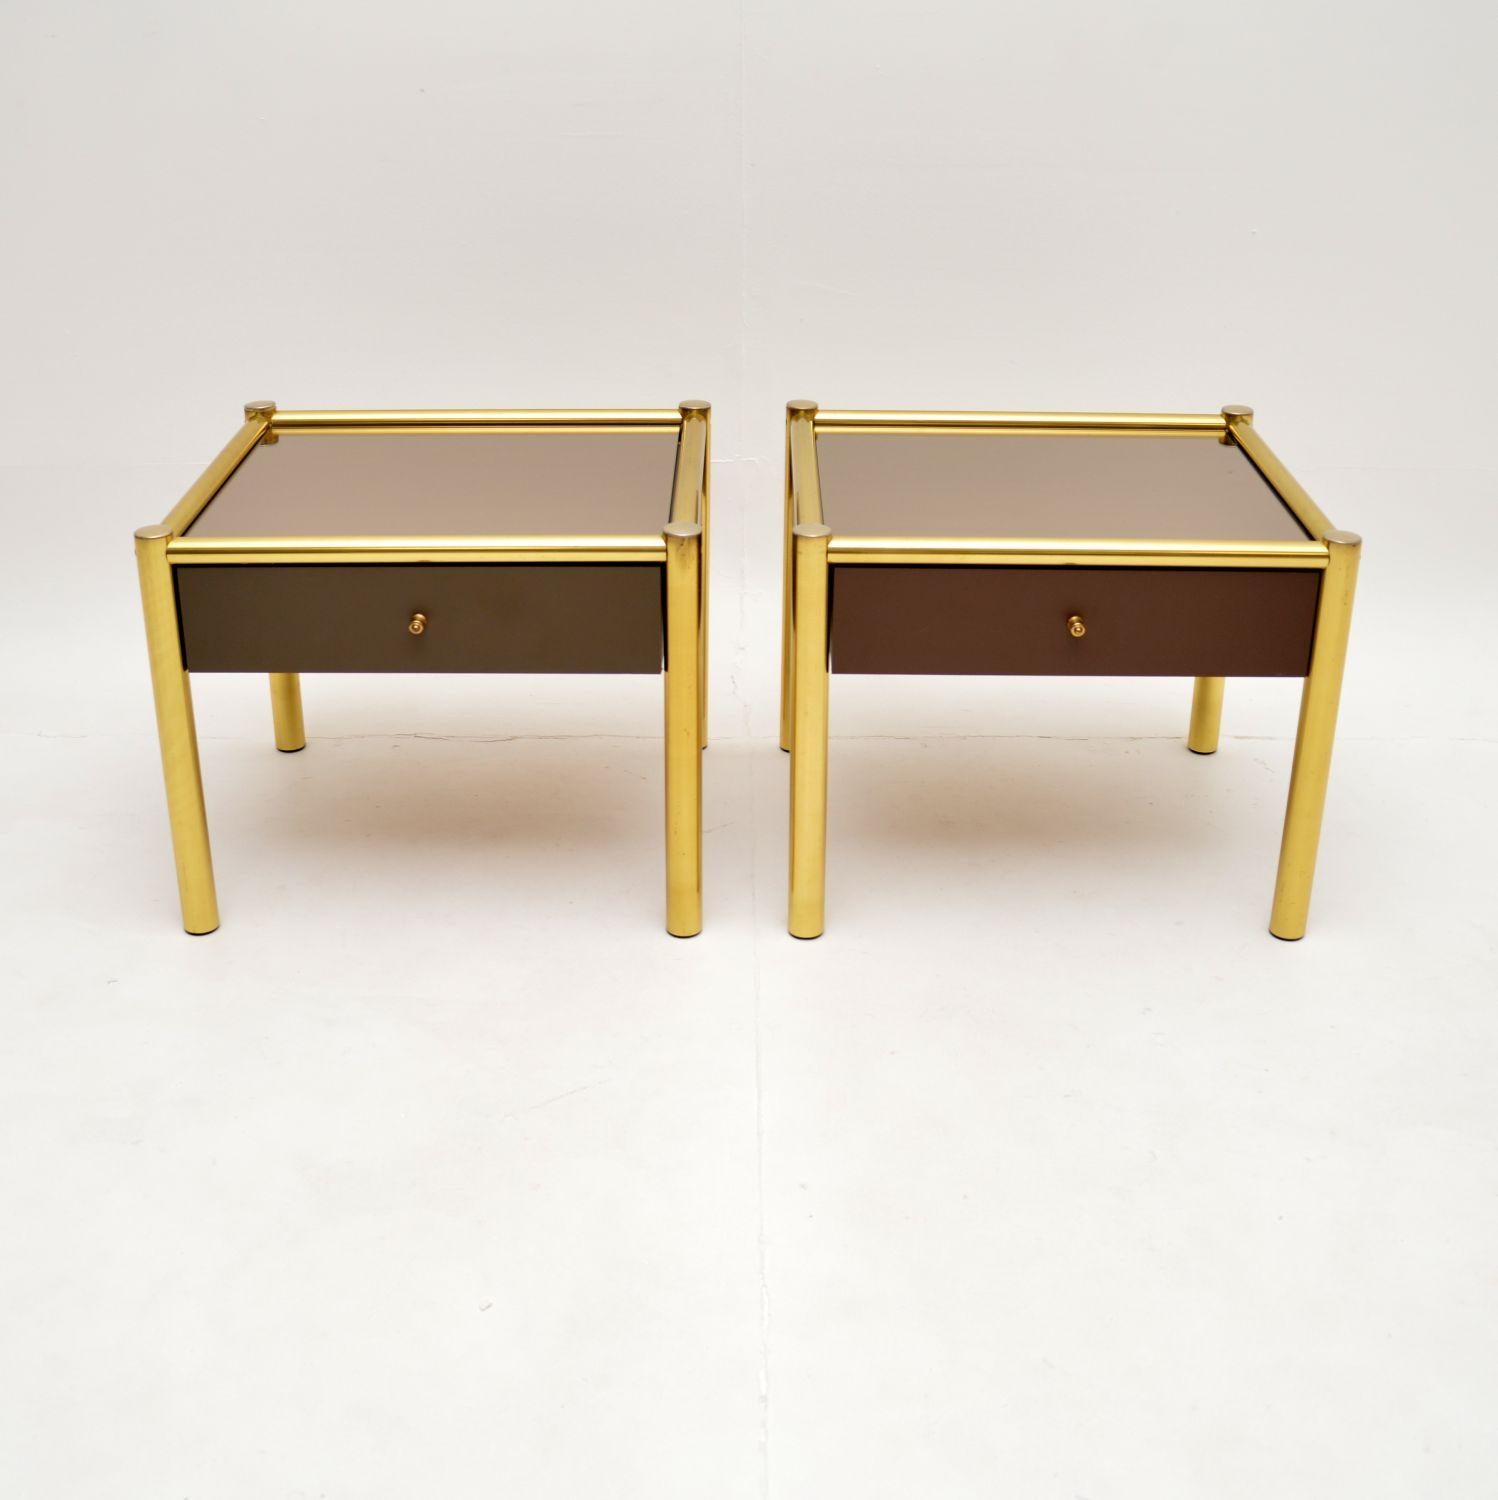 A stylish and very well made pair of vintage brass and glass side tables. They were made in France, they date from around the 1970’s.

They are very well made, the frames are actually brass plated aluminium, with mirrored glass tops. Each has a